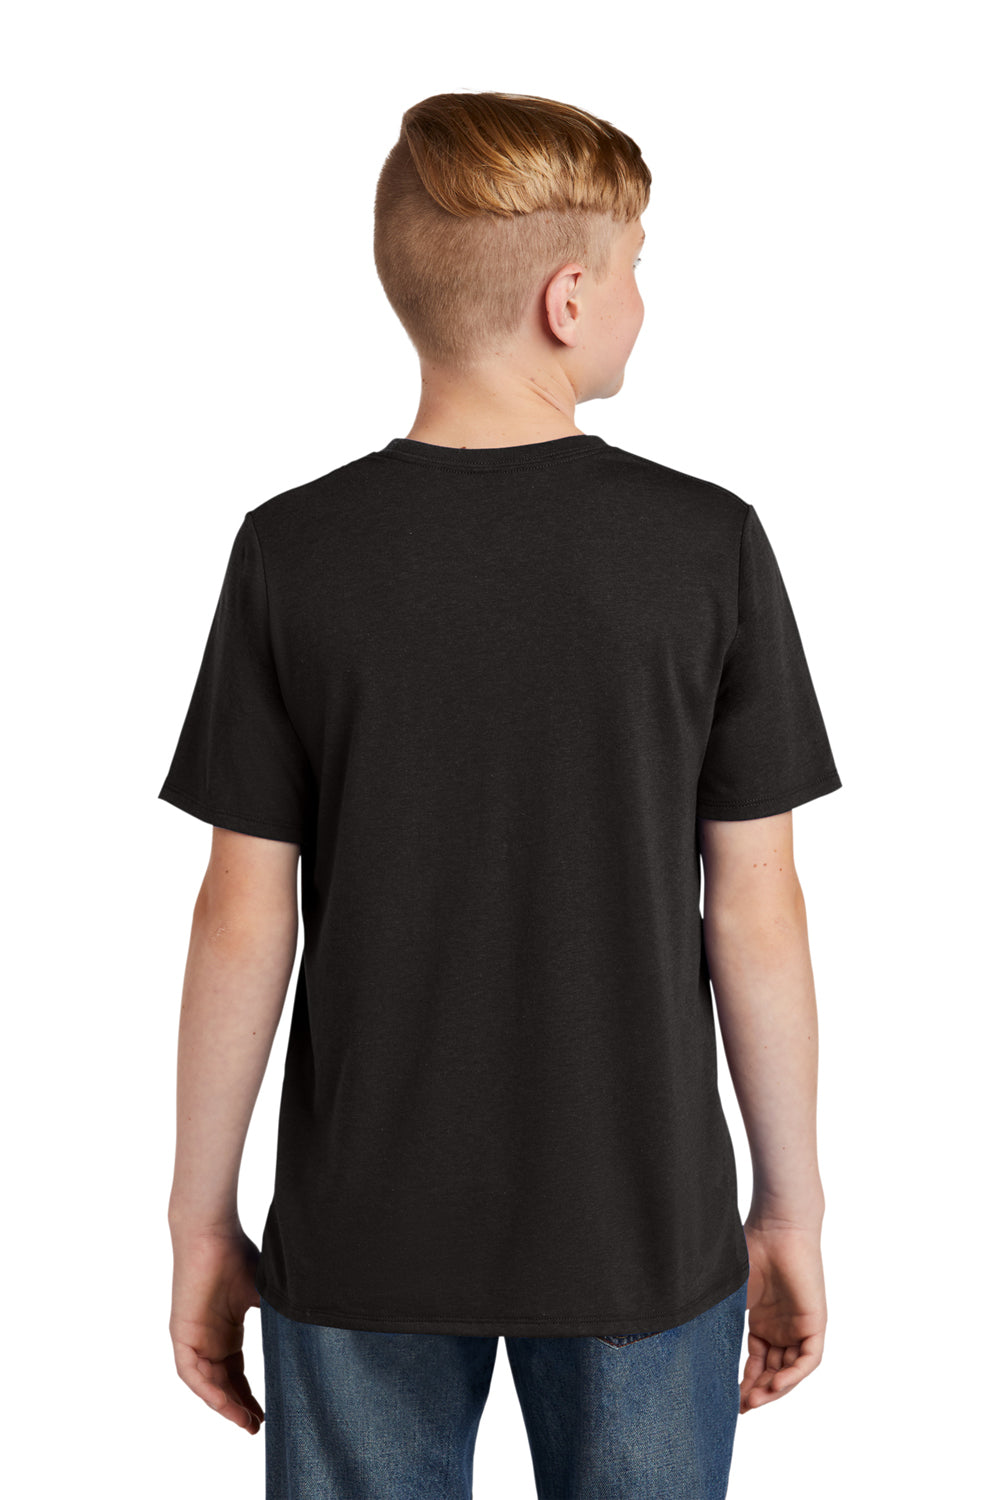 District DT130Y Youth Perfect Tri Short Sleeve Crewneck T-Shirt Black Back